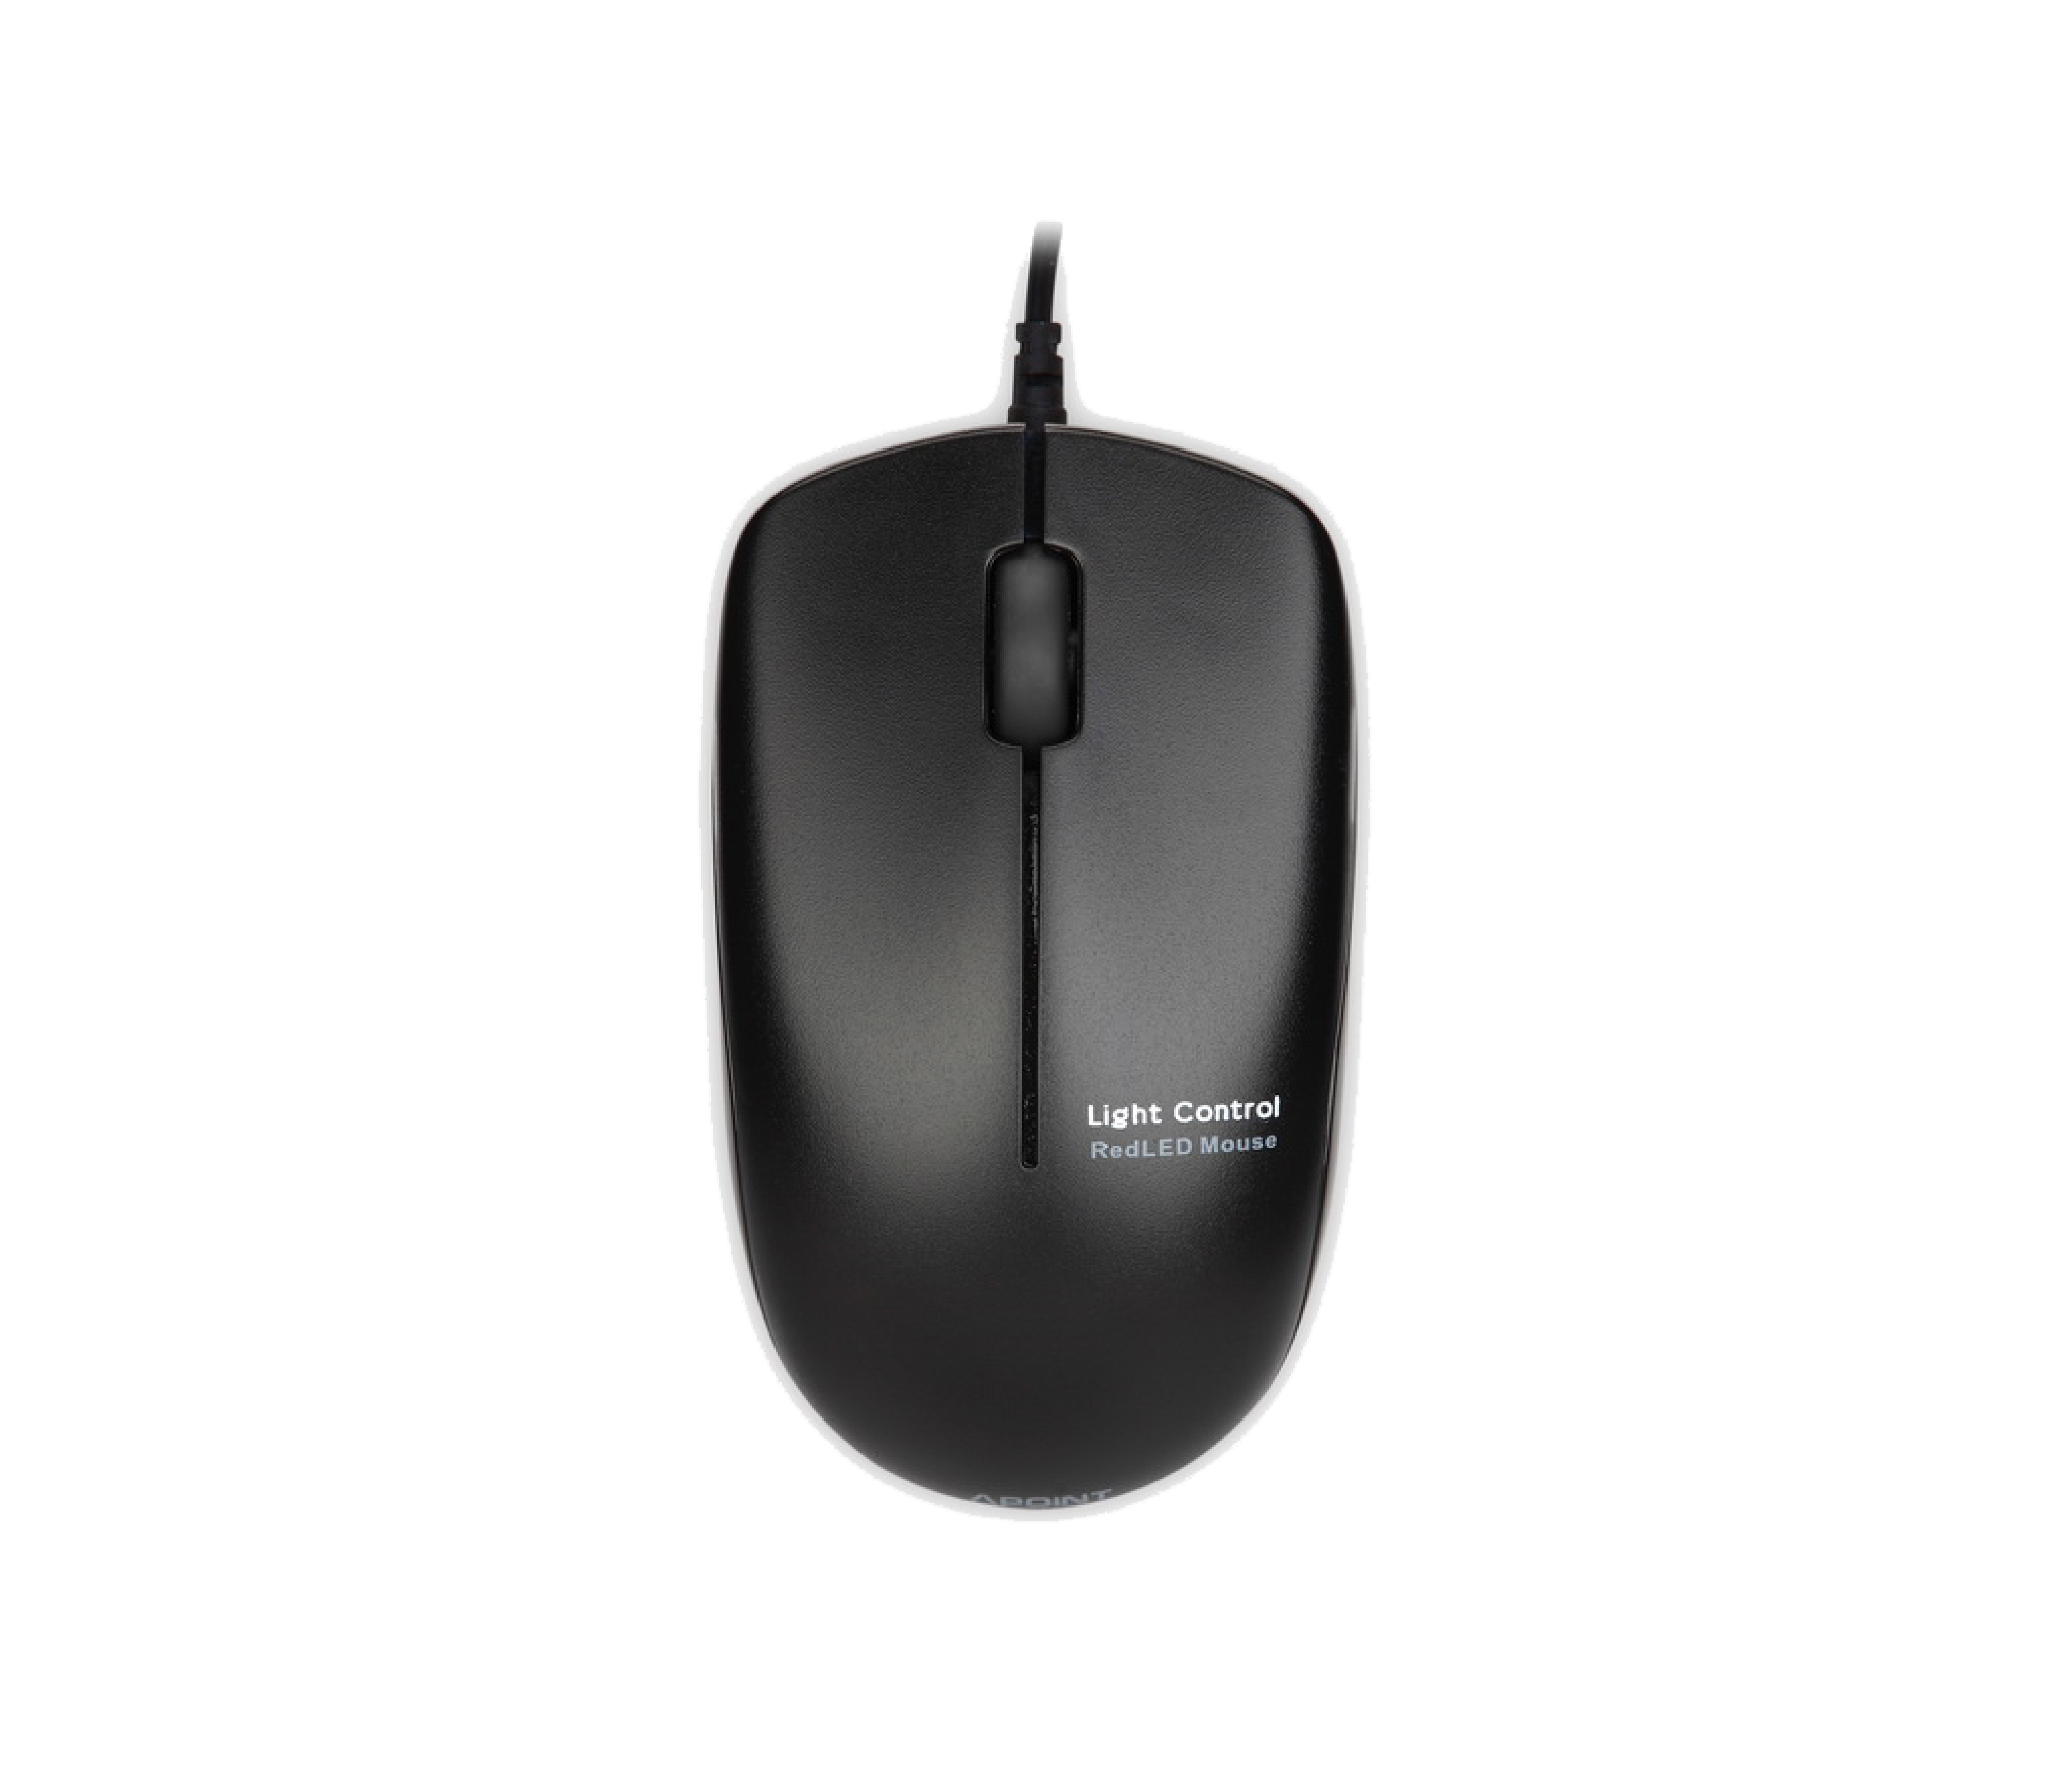 APOINT S2 MOUSE